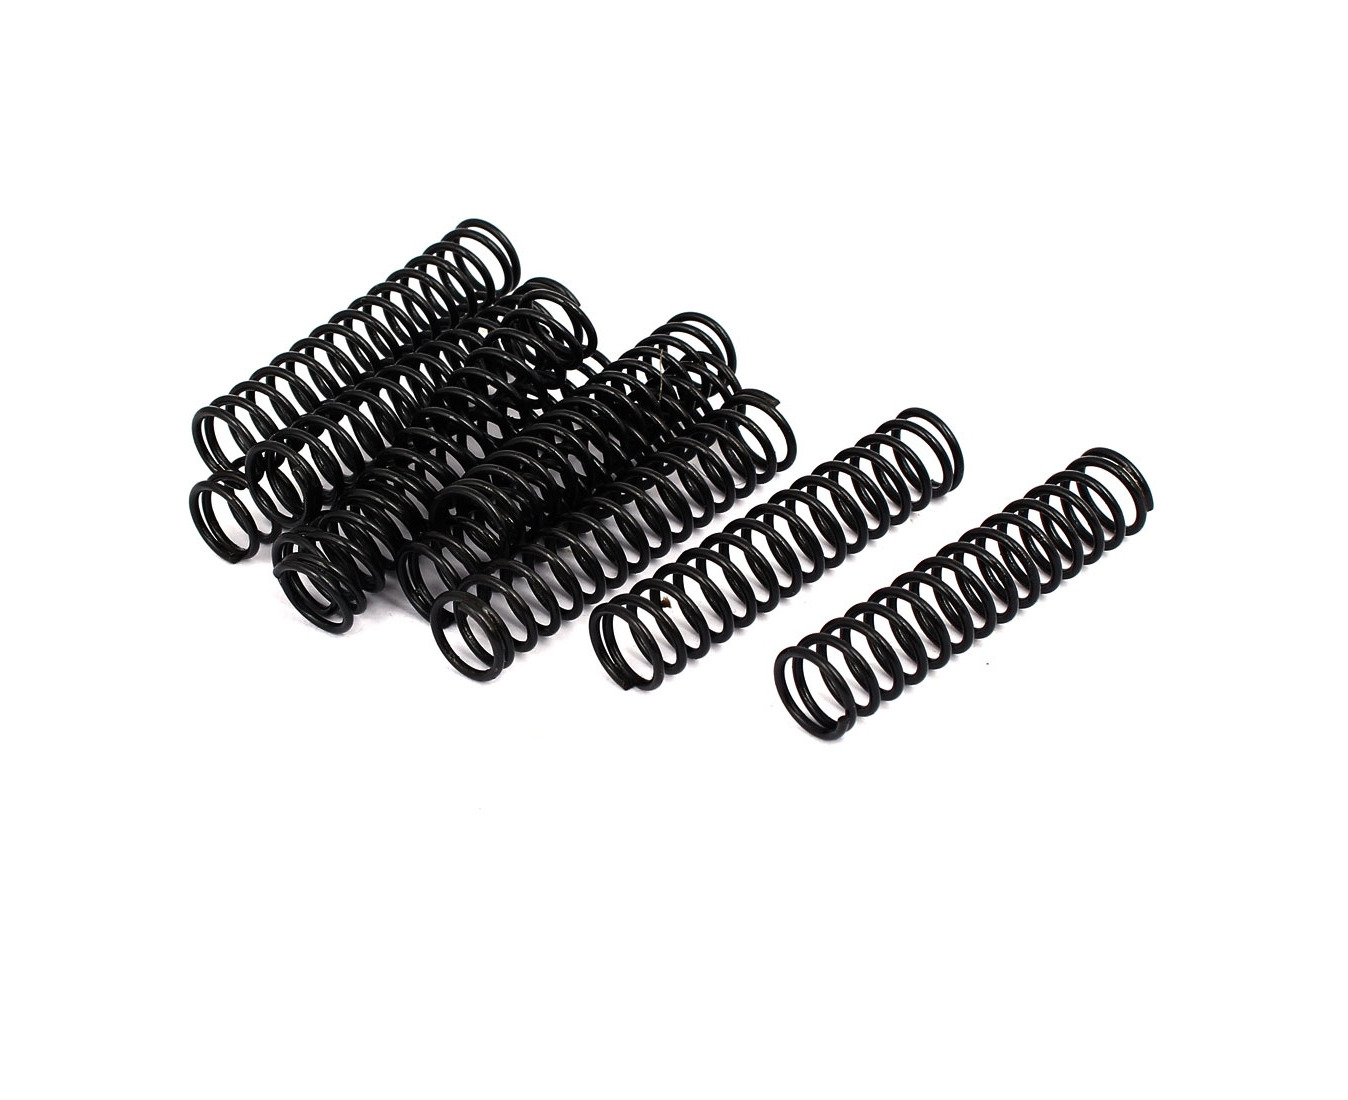 9mm OD sourcingmap Compression Spring 15mm Free Length Spring Steel Extension Spring,Black,10Pcs 1.2mm Wire Dia 